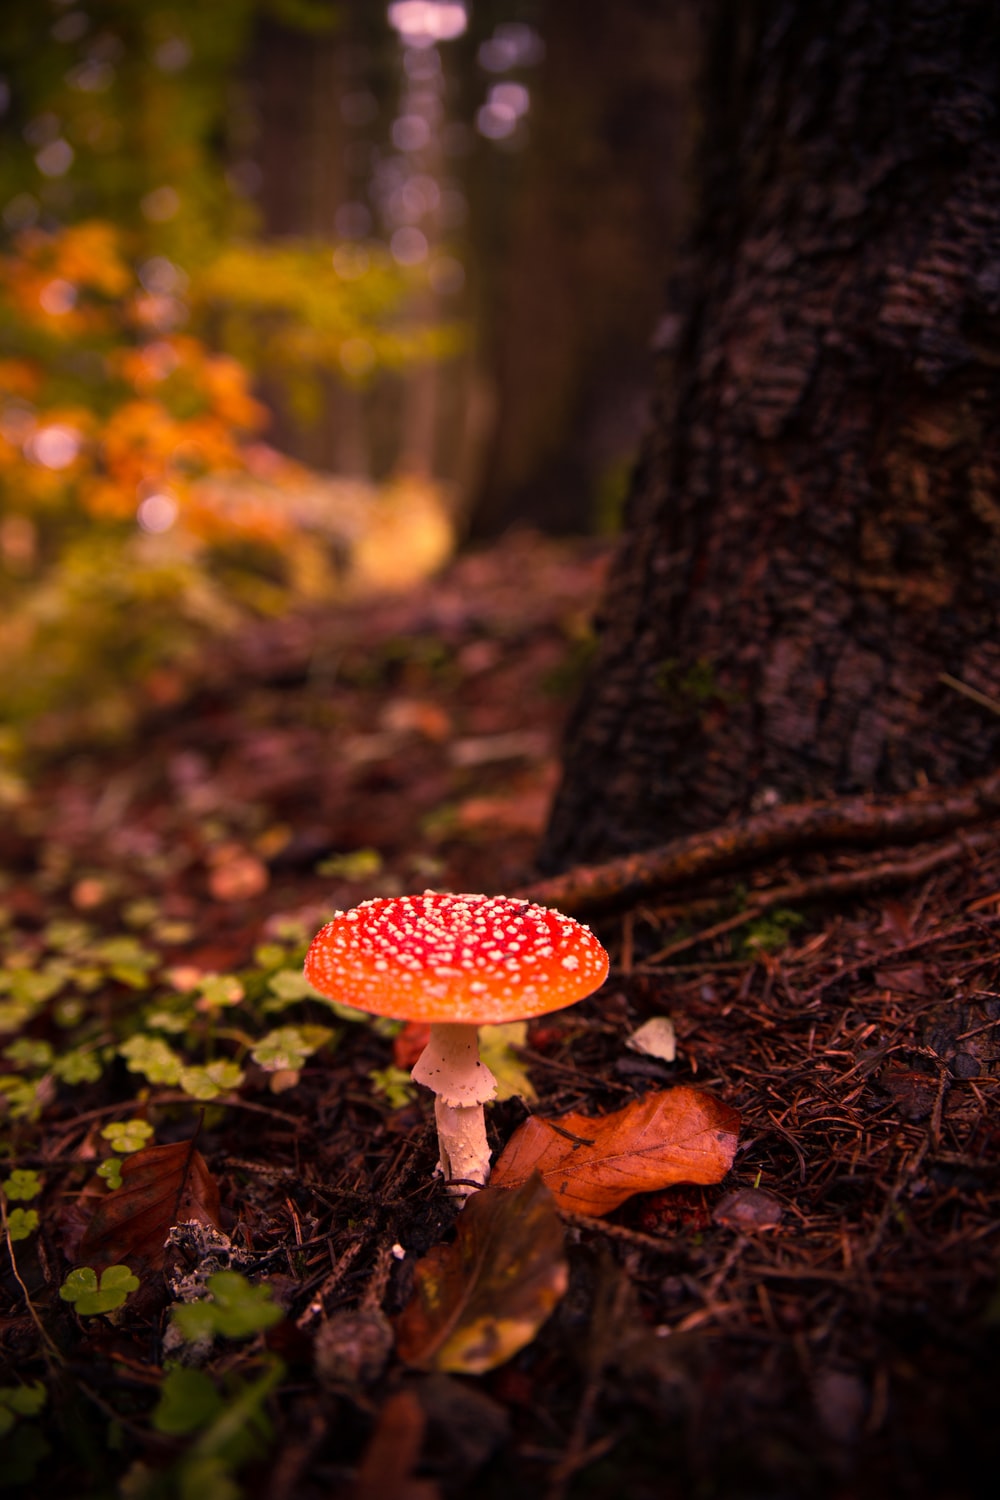 Forest Mushroom Picture. Download Free Image